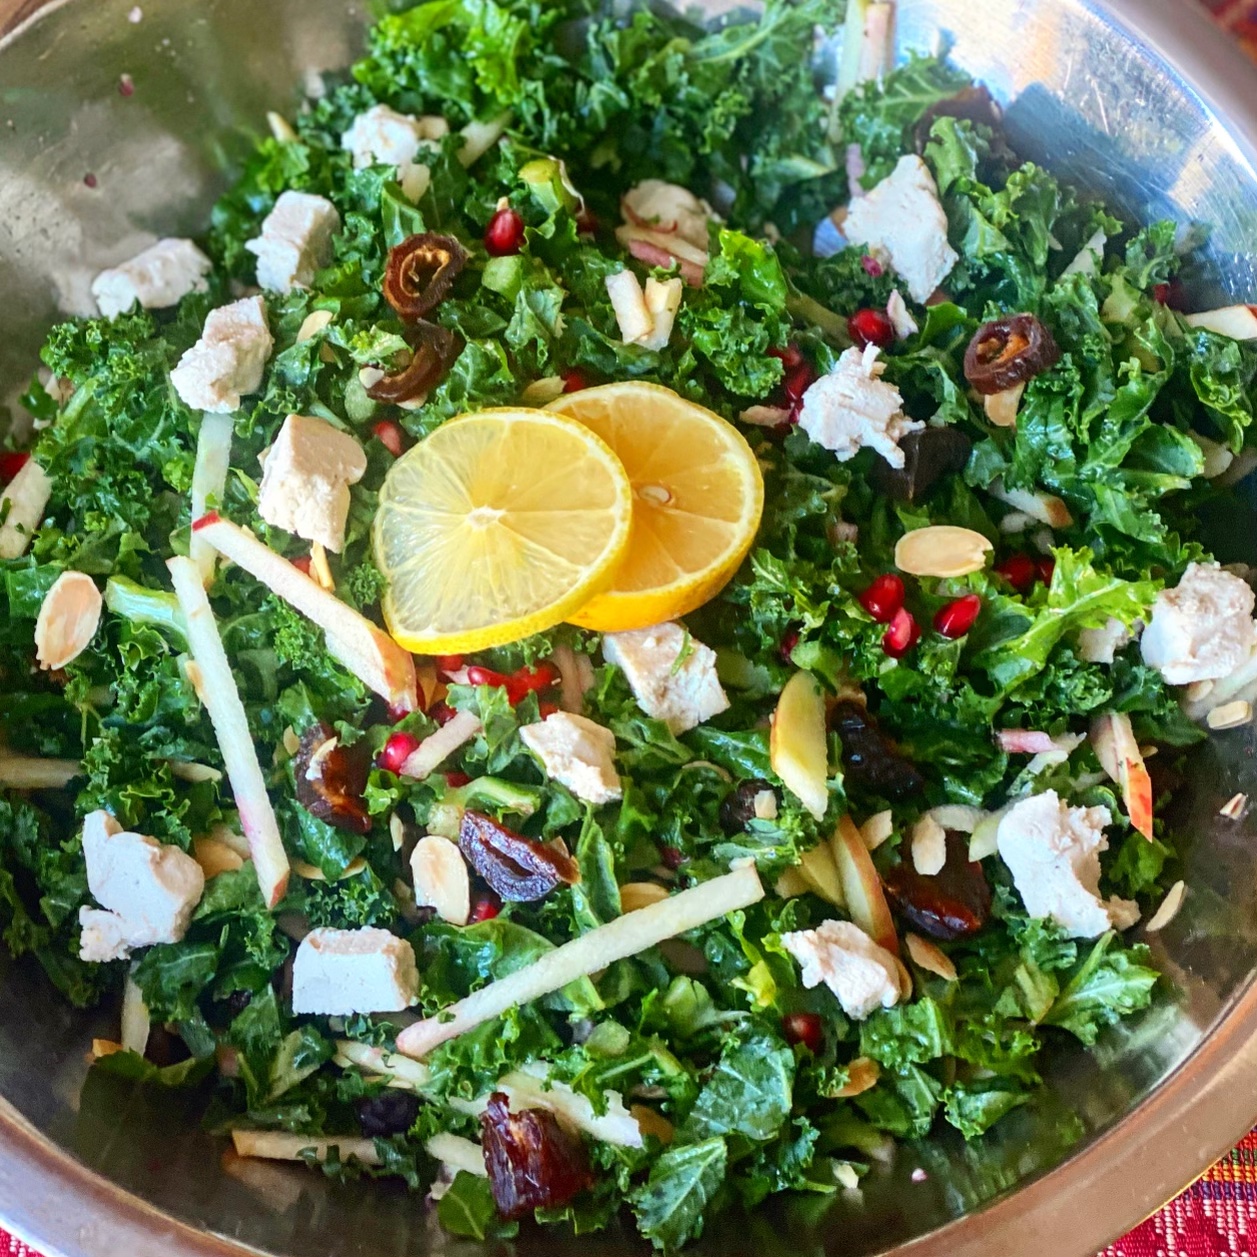 Featured image for “Festive Kale Salad”